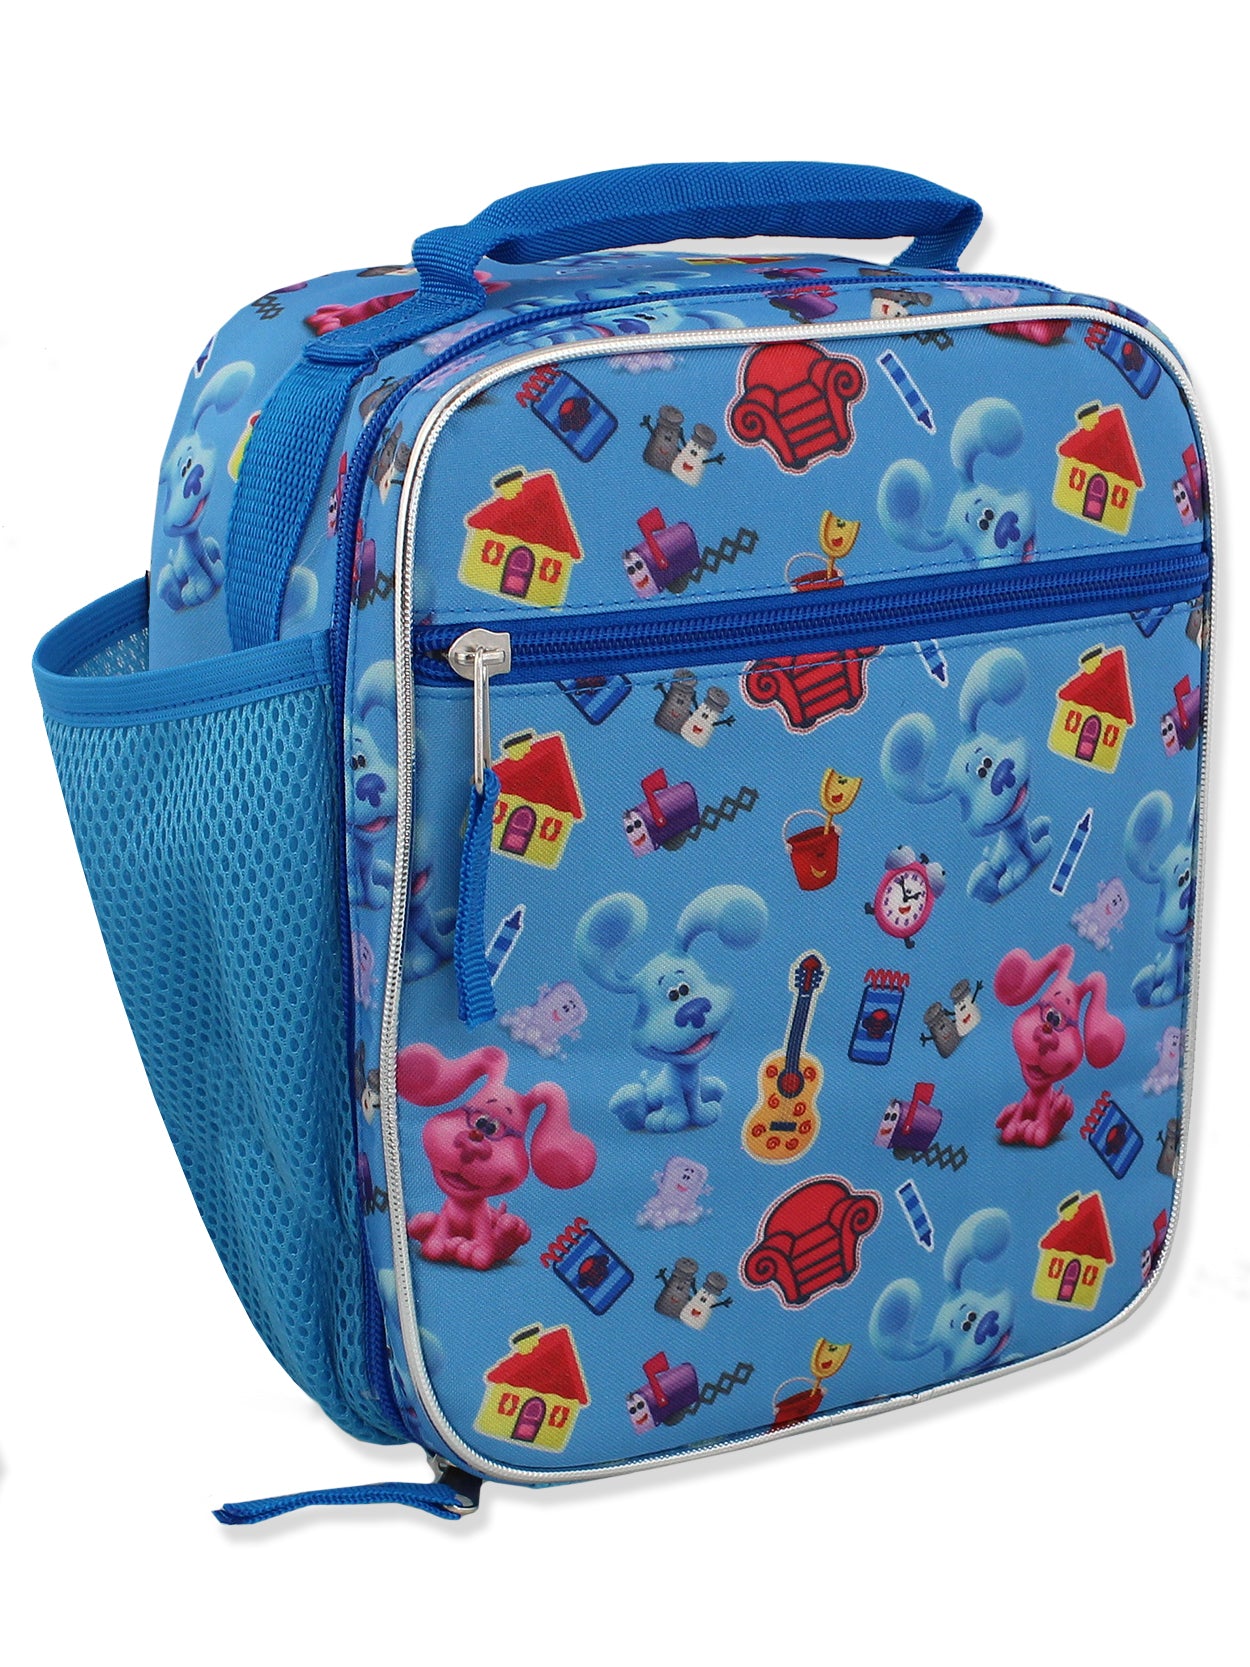 Nickelodeon Blue's Clues & You Girls Boys Soft Insulated School Lunch Box (One size, Blue)